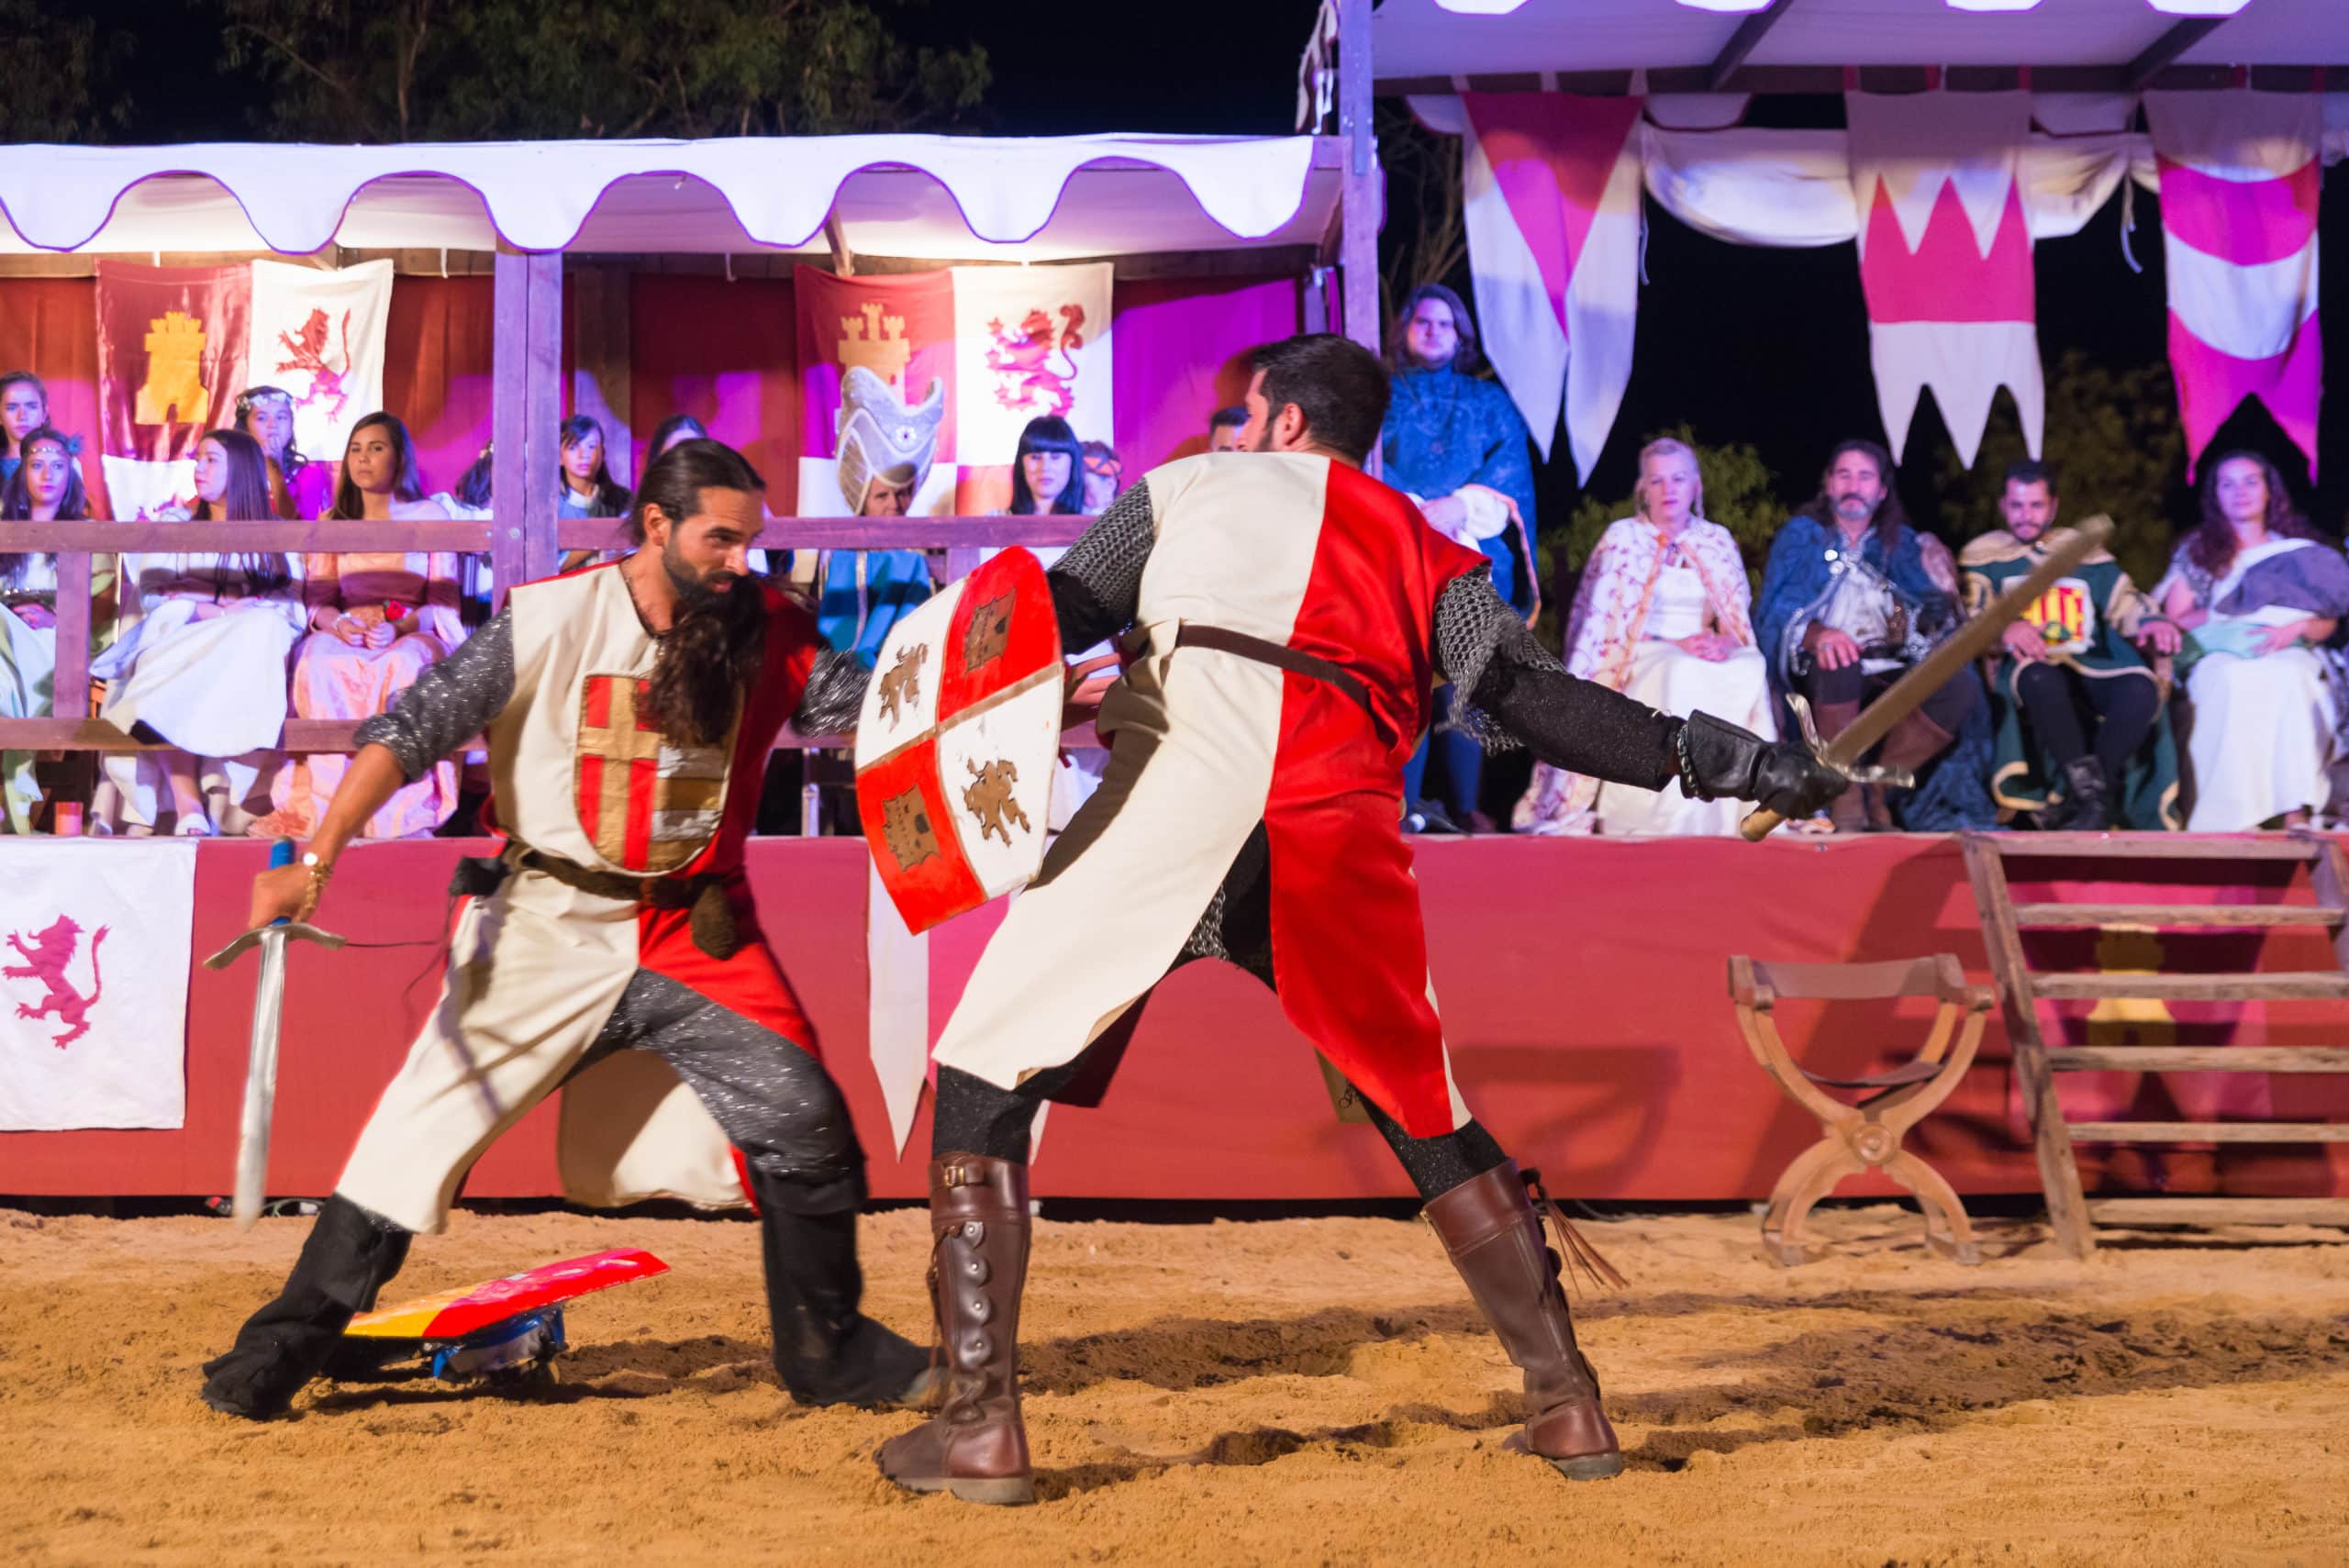 Battle of the knights in the Medieval Festival.